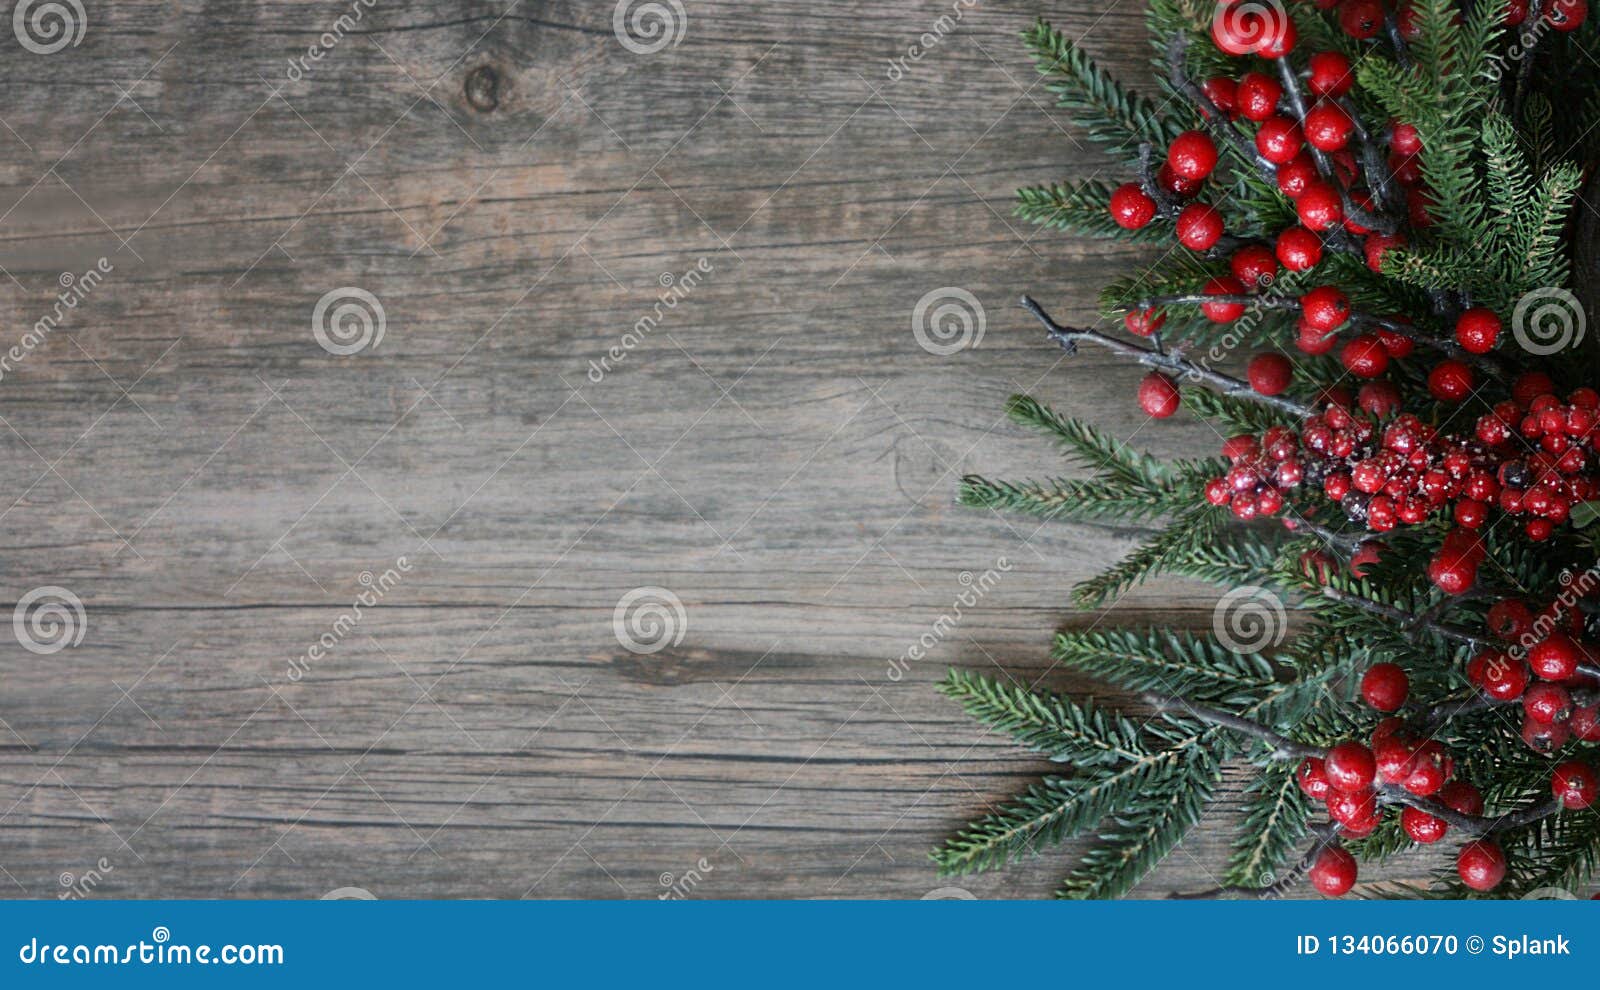 christmas evergreen branches and berries over rustic wood horizontal background